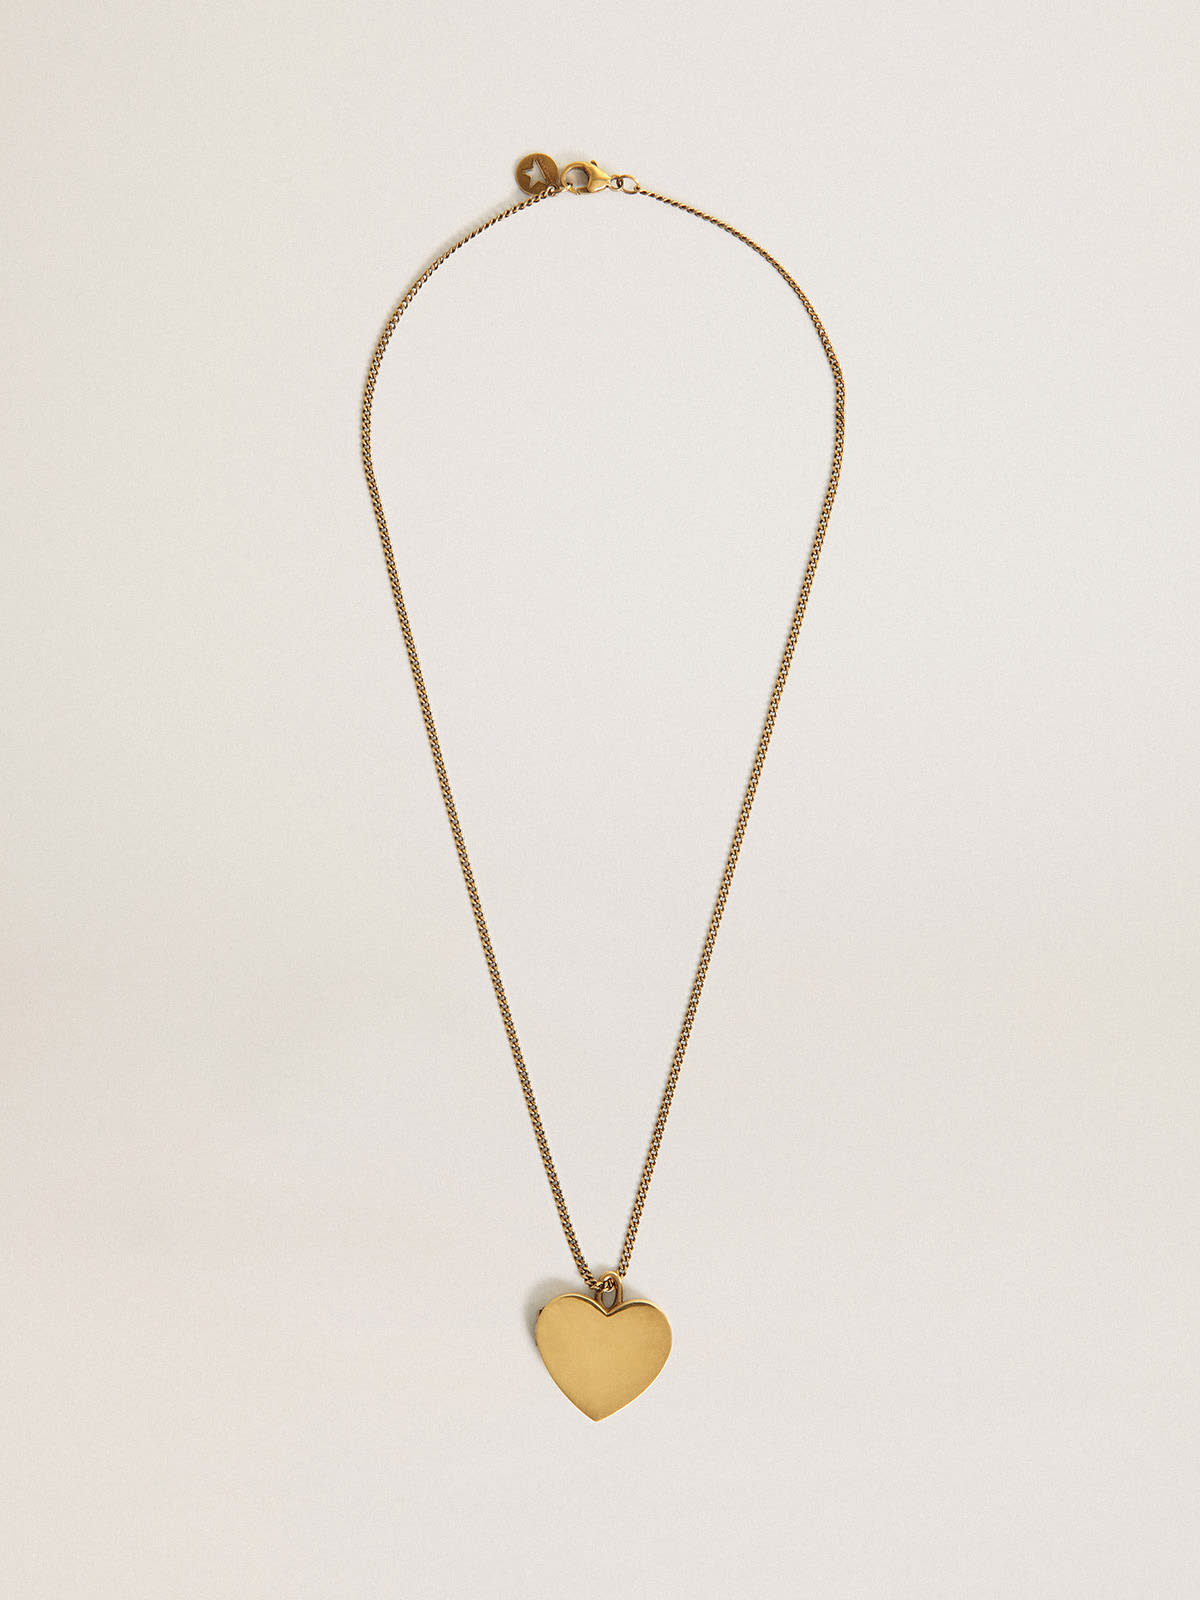 Golden Goose - Necklace in old gold color with heart charms in 